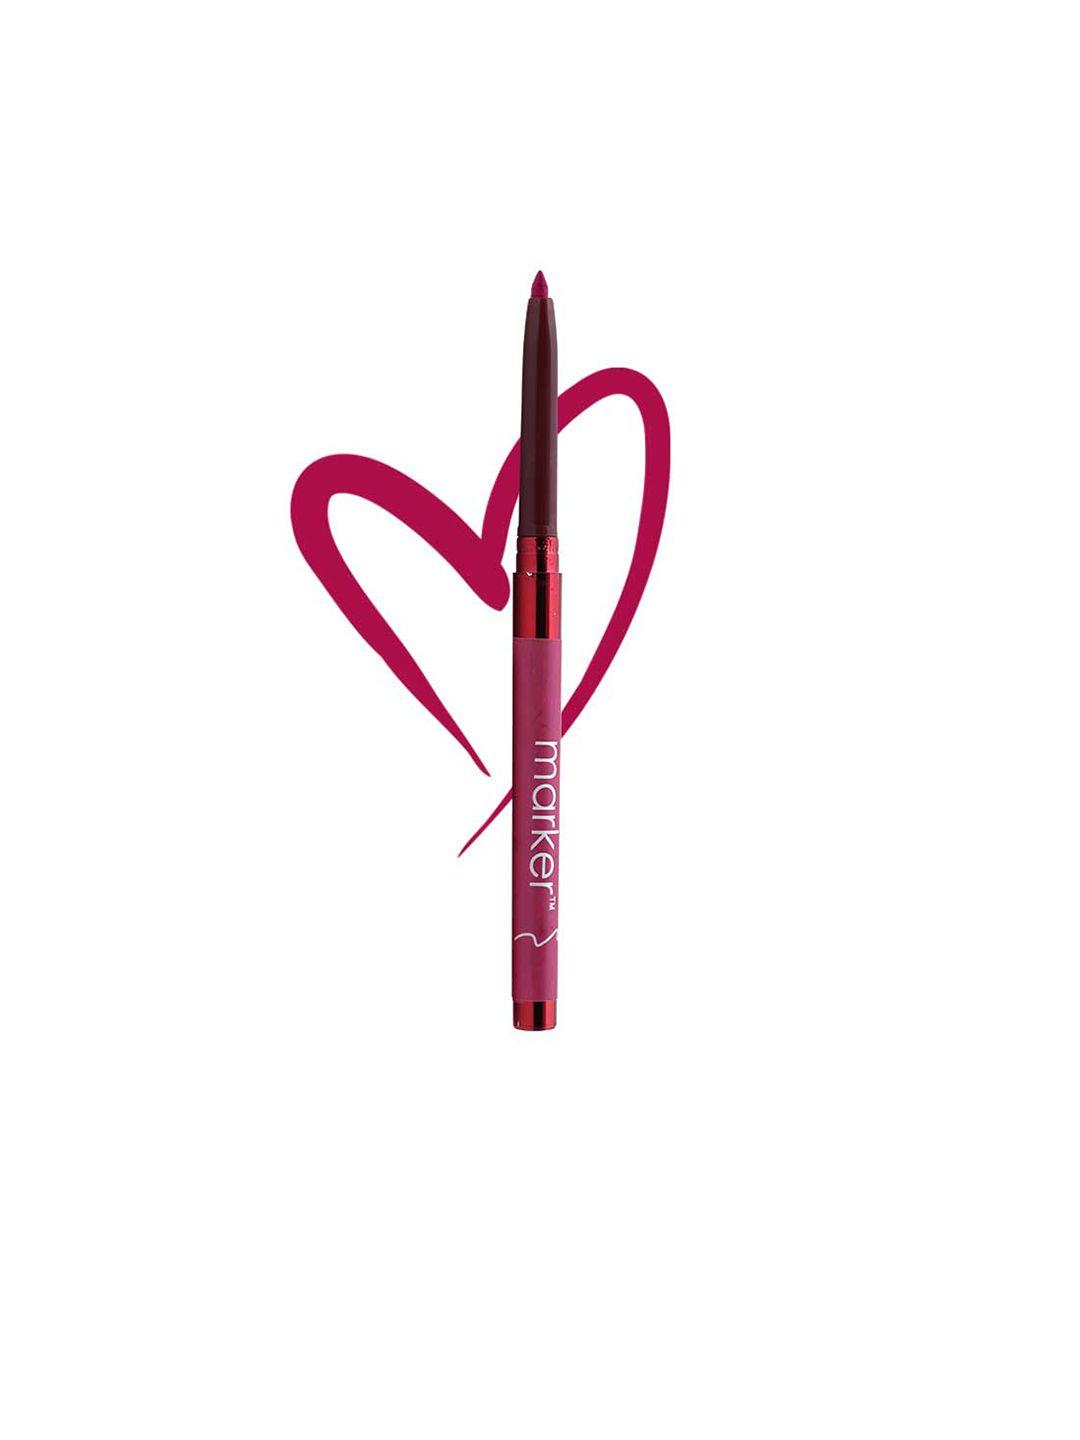 beautyrelay london outline the lips long-lasting lip liner with vitamin e 0.27g - bright pink